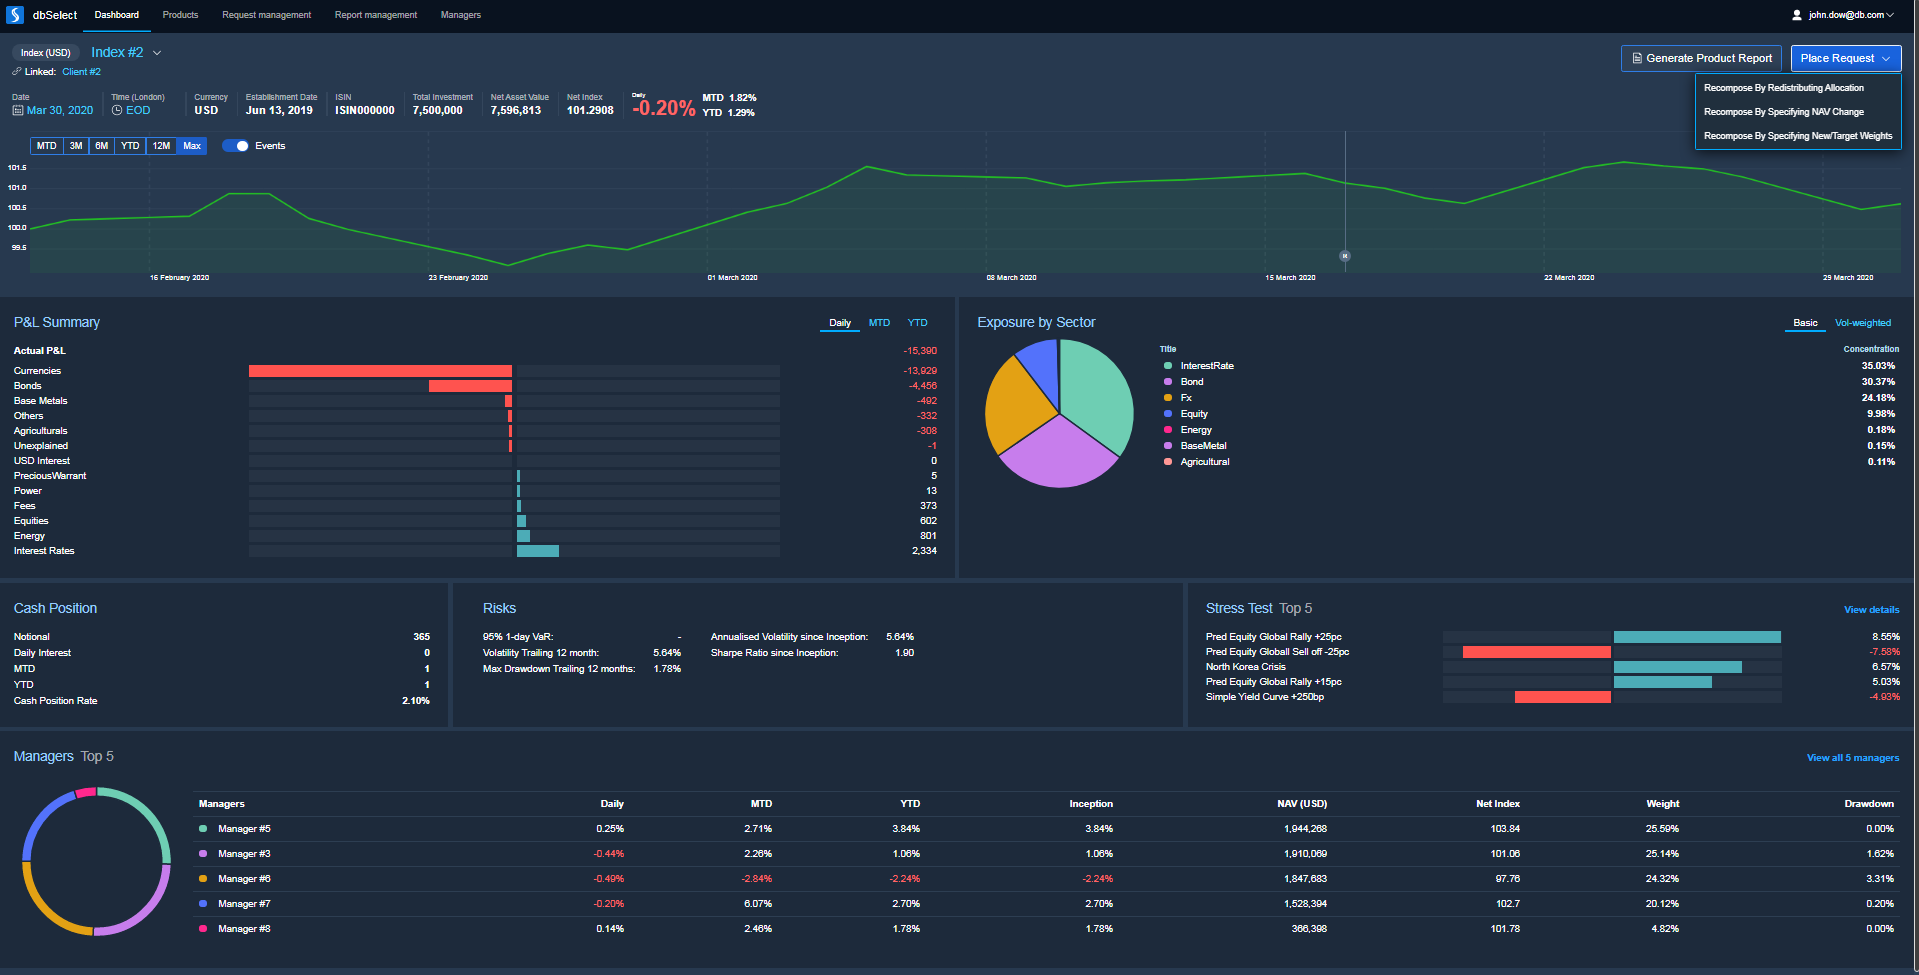 dbSelect Invesment Portfolio overview dashboard screen